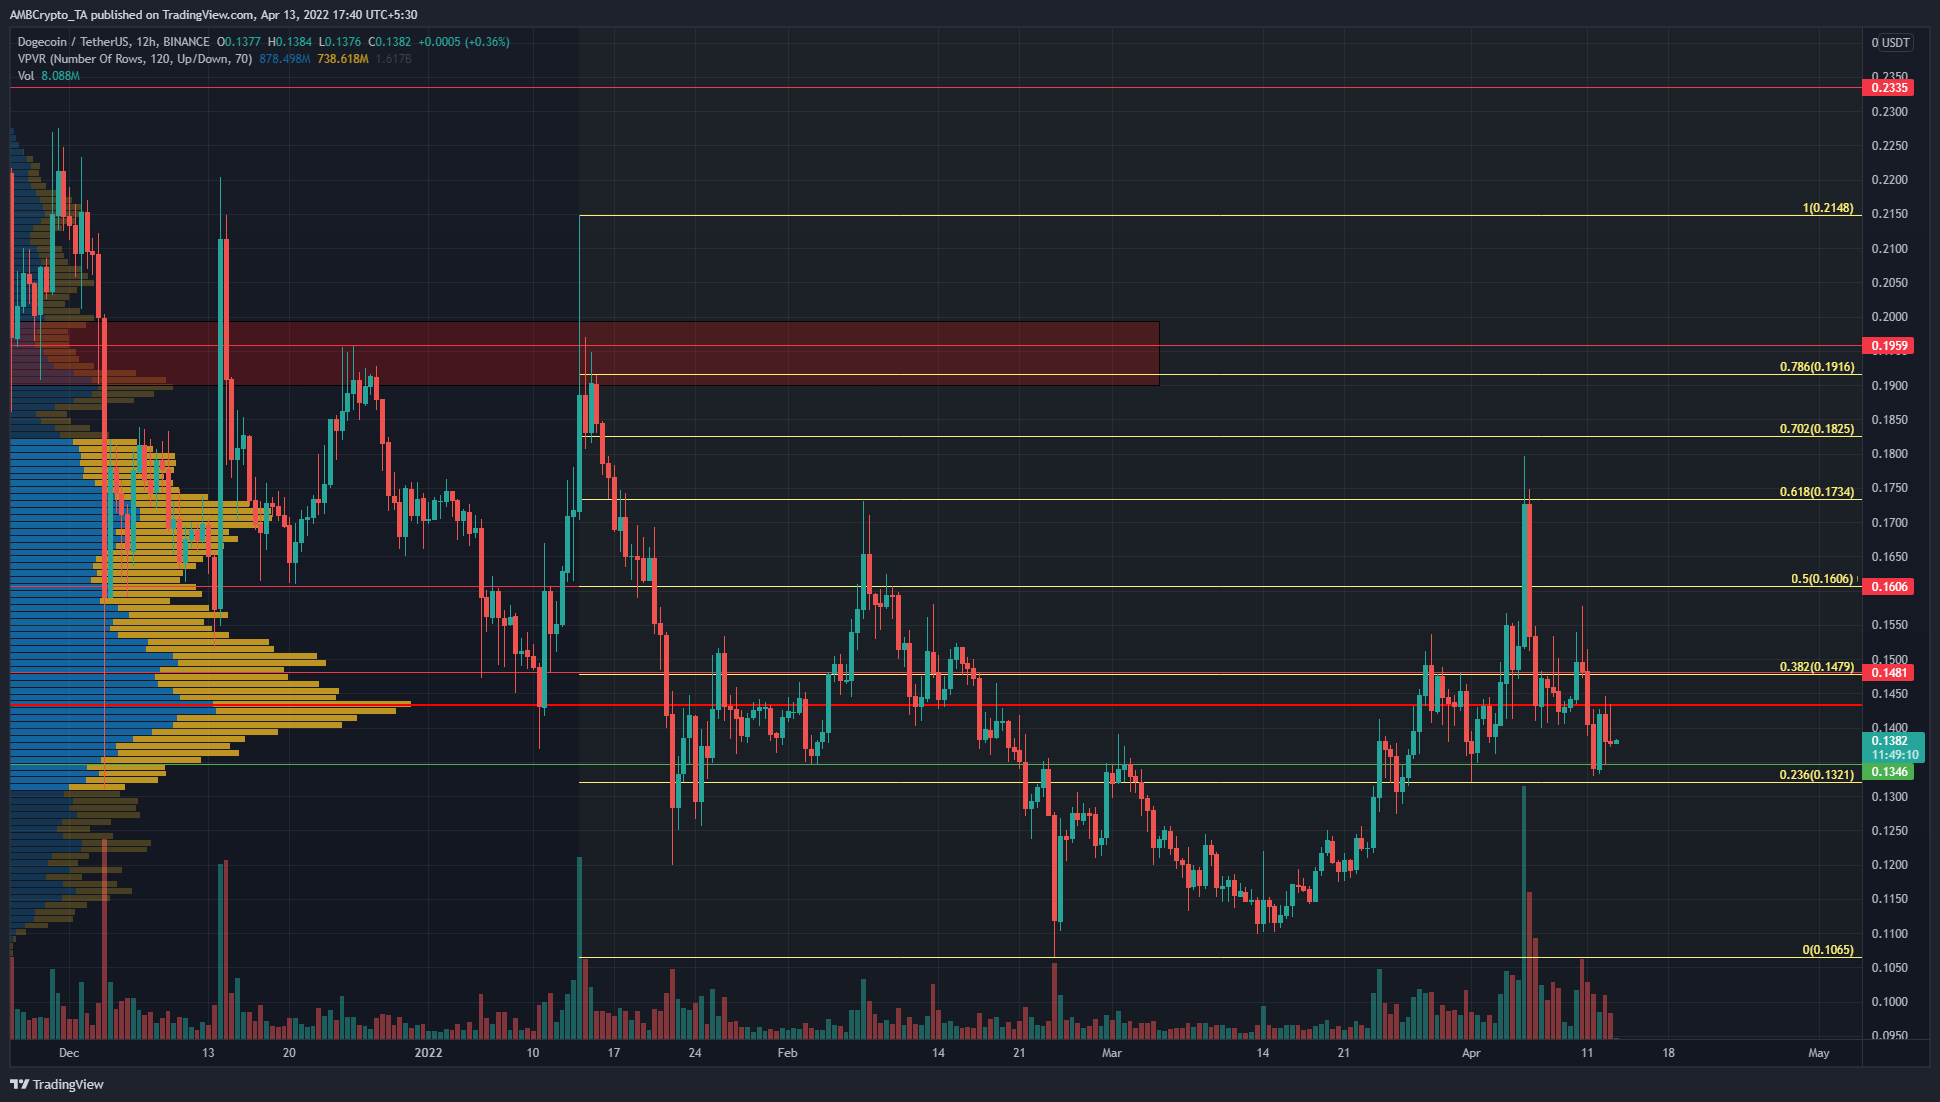 Dogecoin bulls need to defend this critical area of support, but the outlook remains bleak